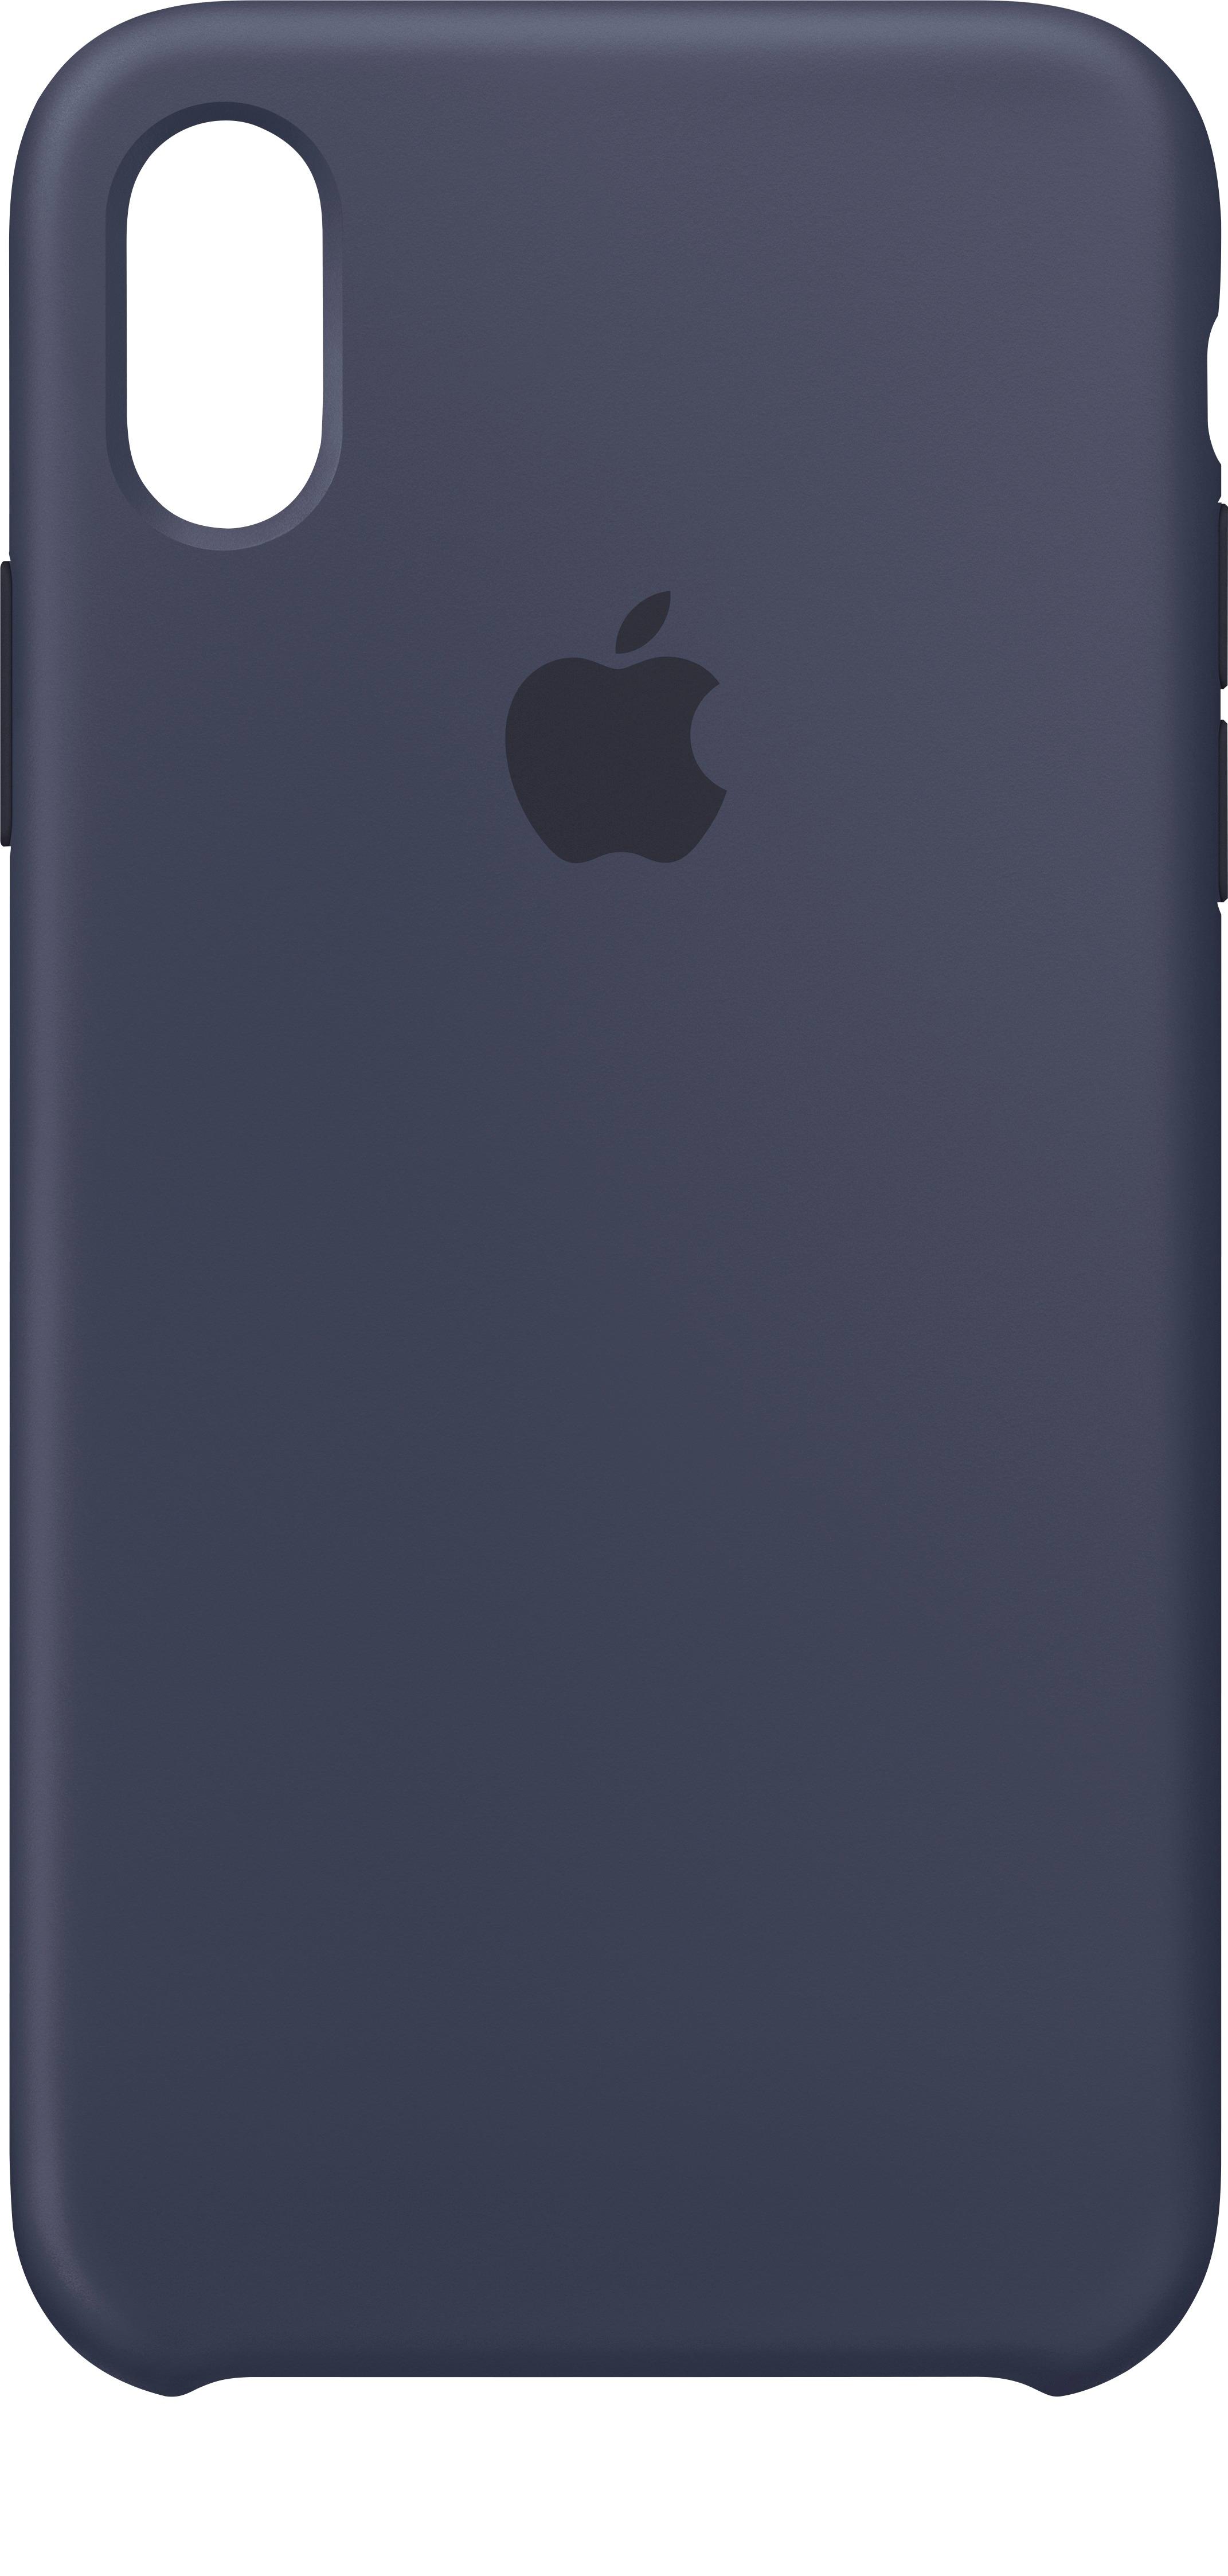 Best Buy Apple Iphone X Silicone Case Midnight Blue 010kf0703